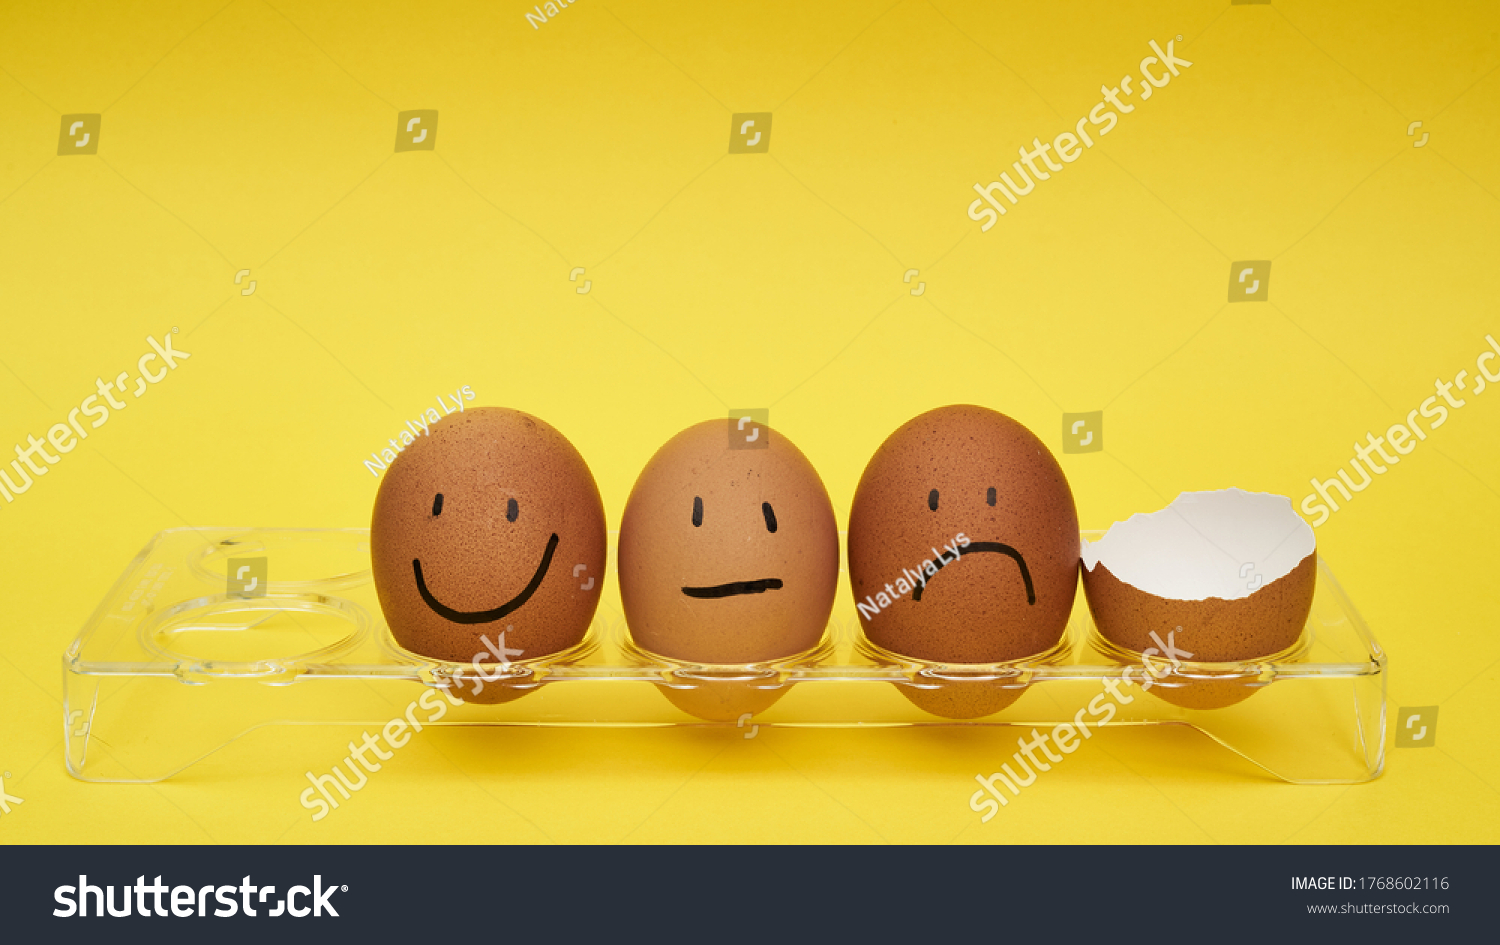 Chicken eggs in an egg holder. Full tray of eggs. Half an egg, egg yolk, shell. Emotion and facial expression painted on eggs #1768602116